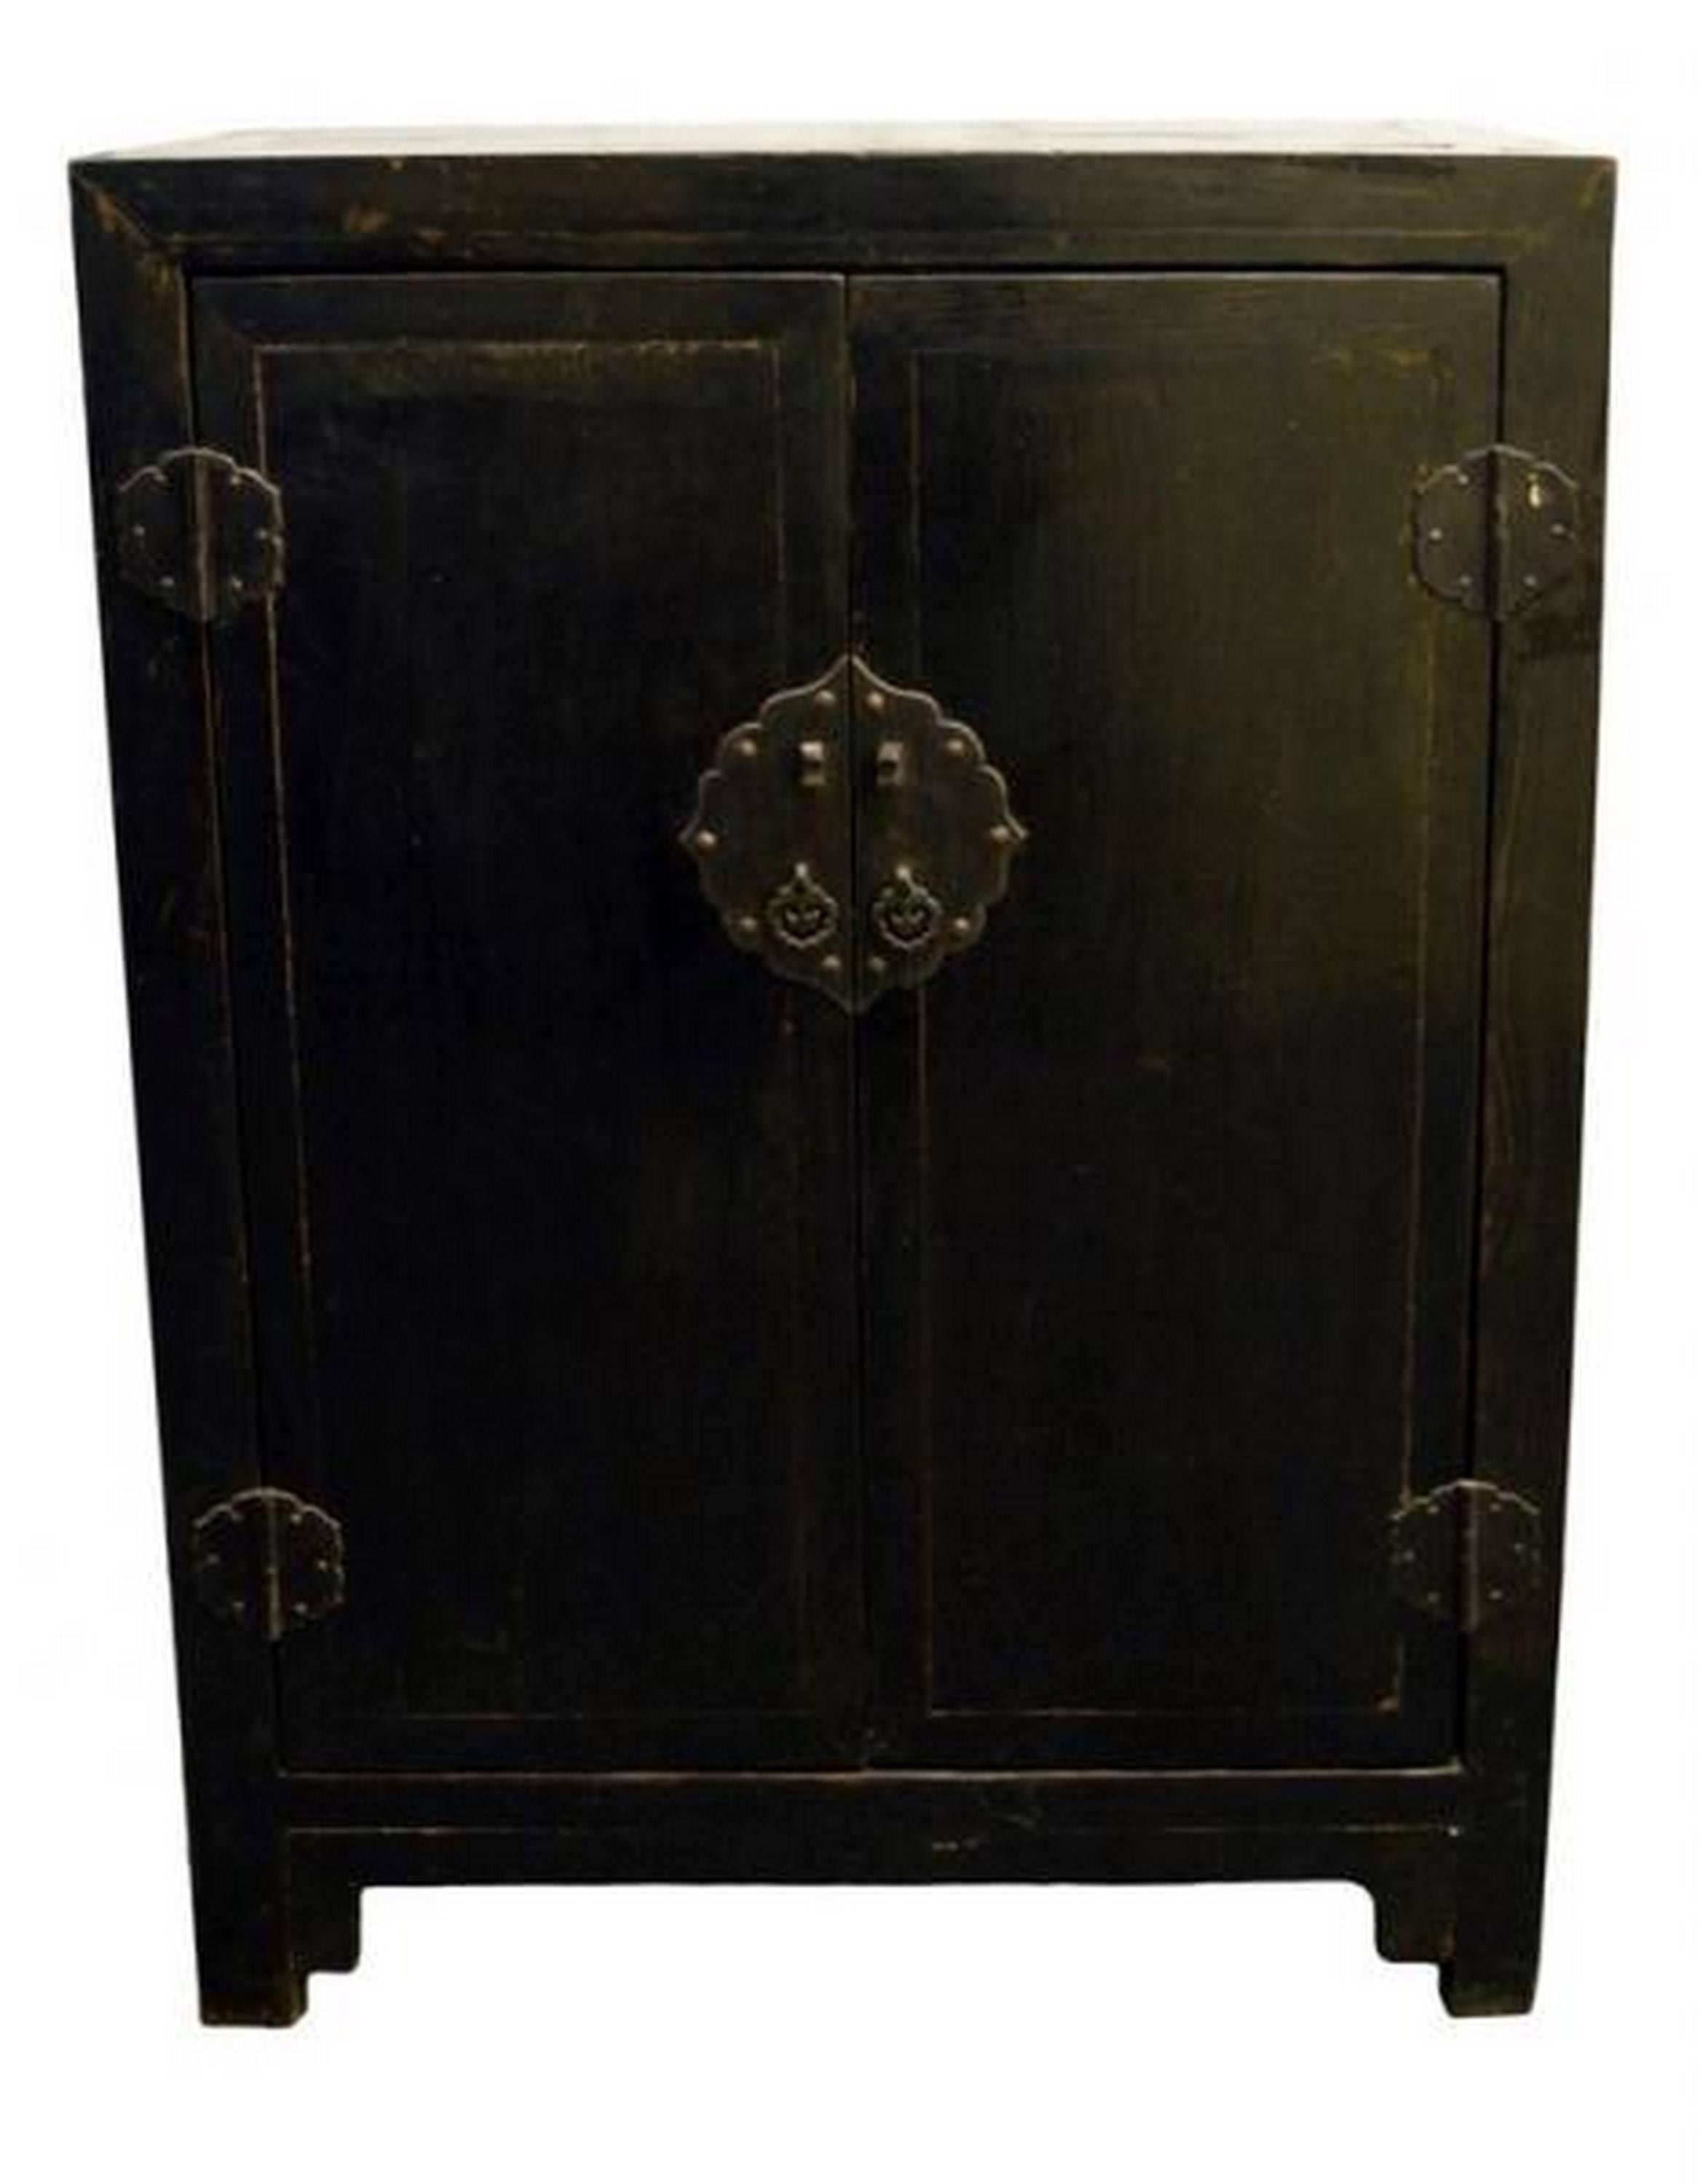 Lacquered Antique Black Lacquer Side Cabinet with Brass Hardware from 19th Century China